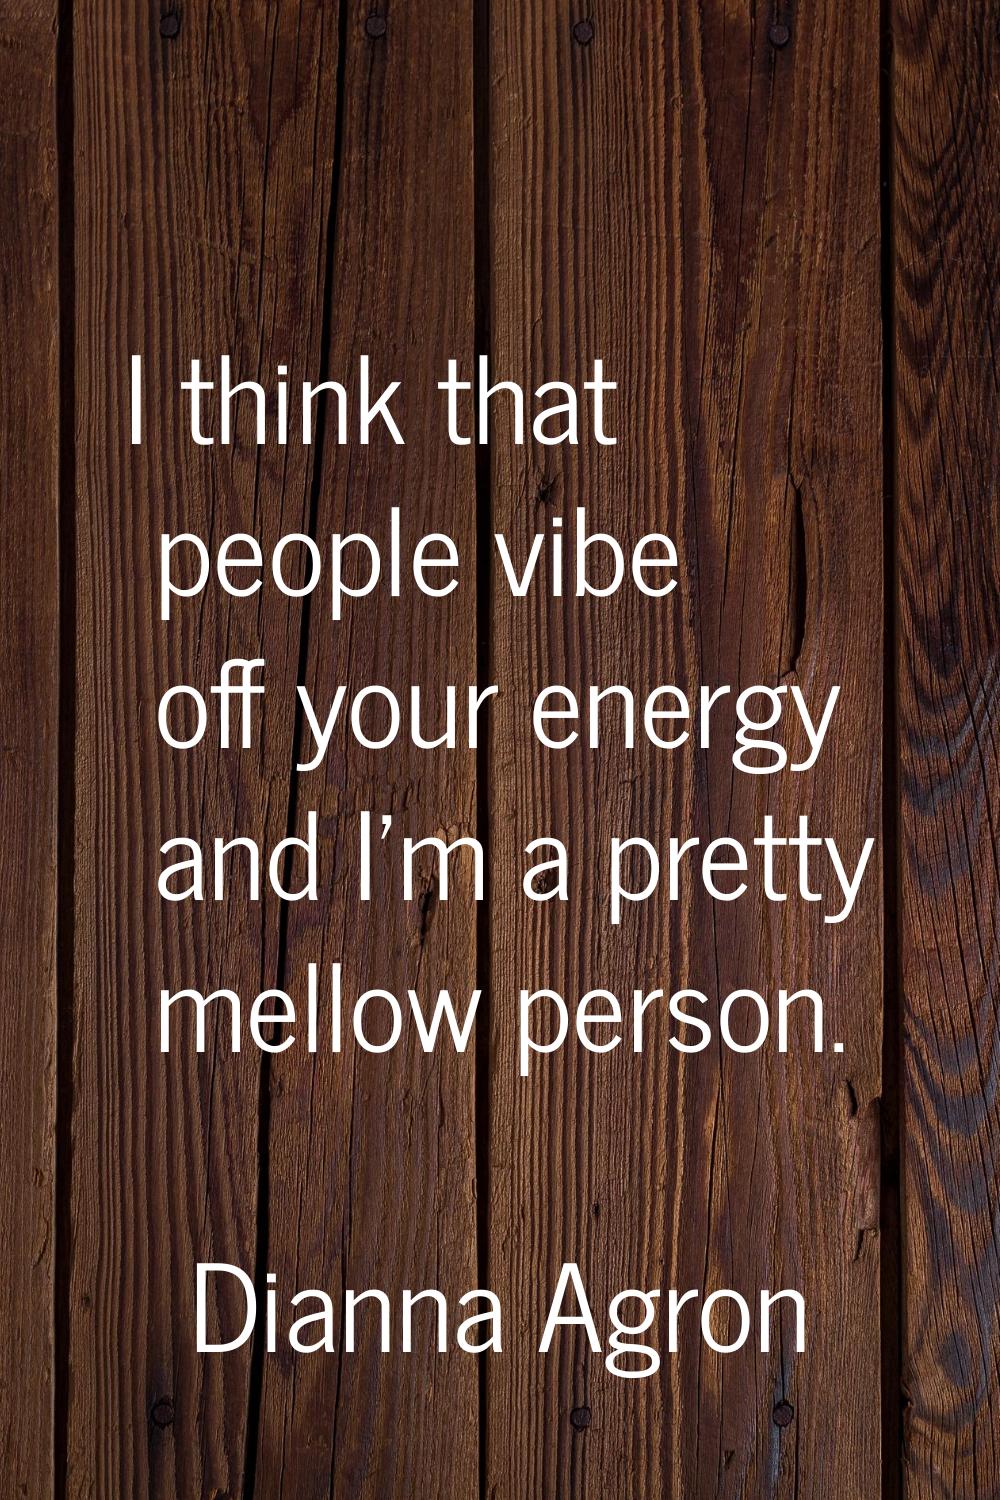 I think that people vibe off your energy and I'm a pretty mellow person.